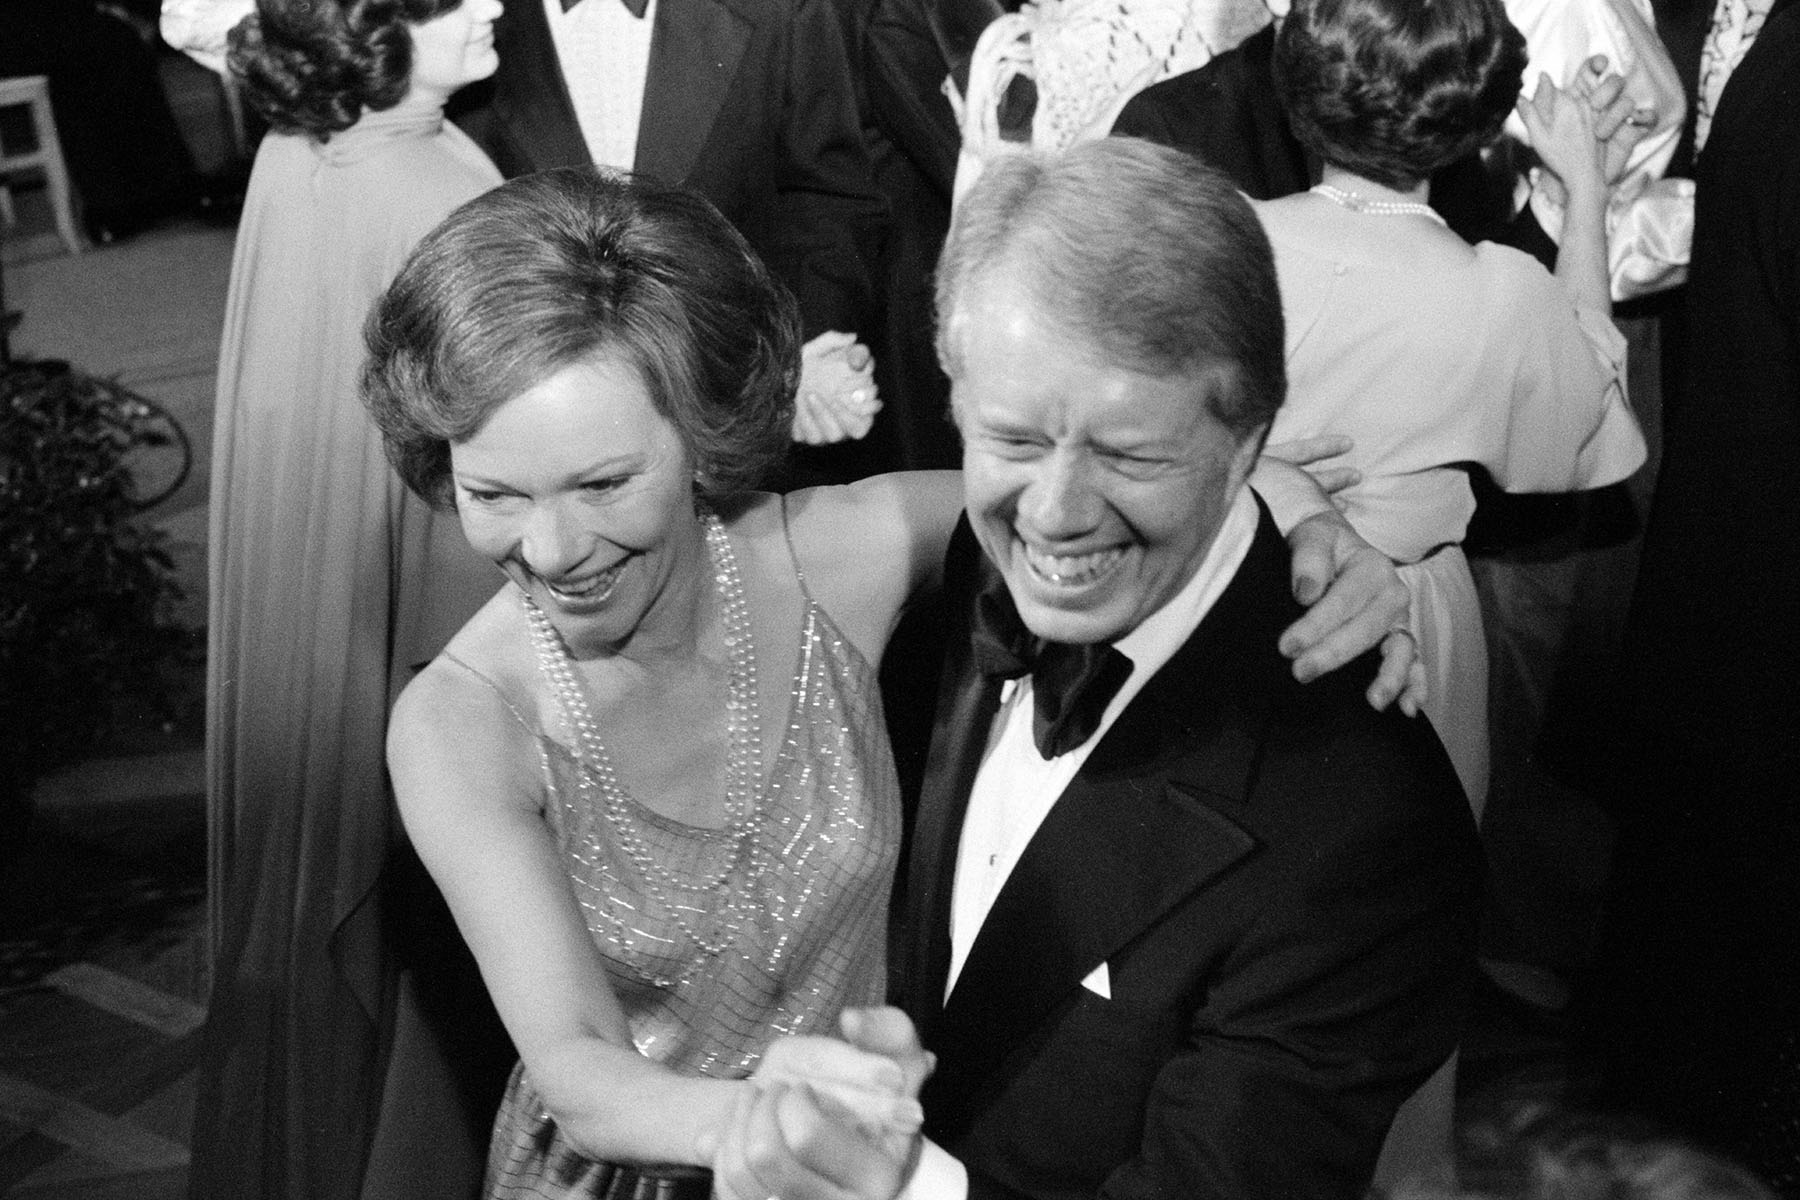 President Jimmy Carter and First Lady Rosalynn Carter dance at a White House Congressional Ball in 1977.